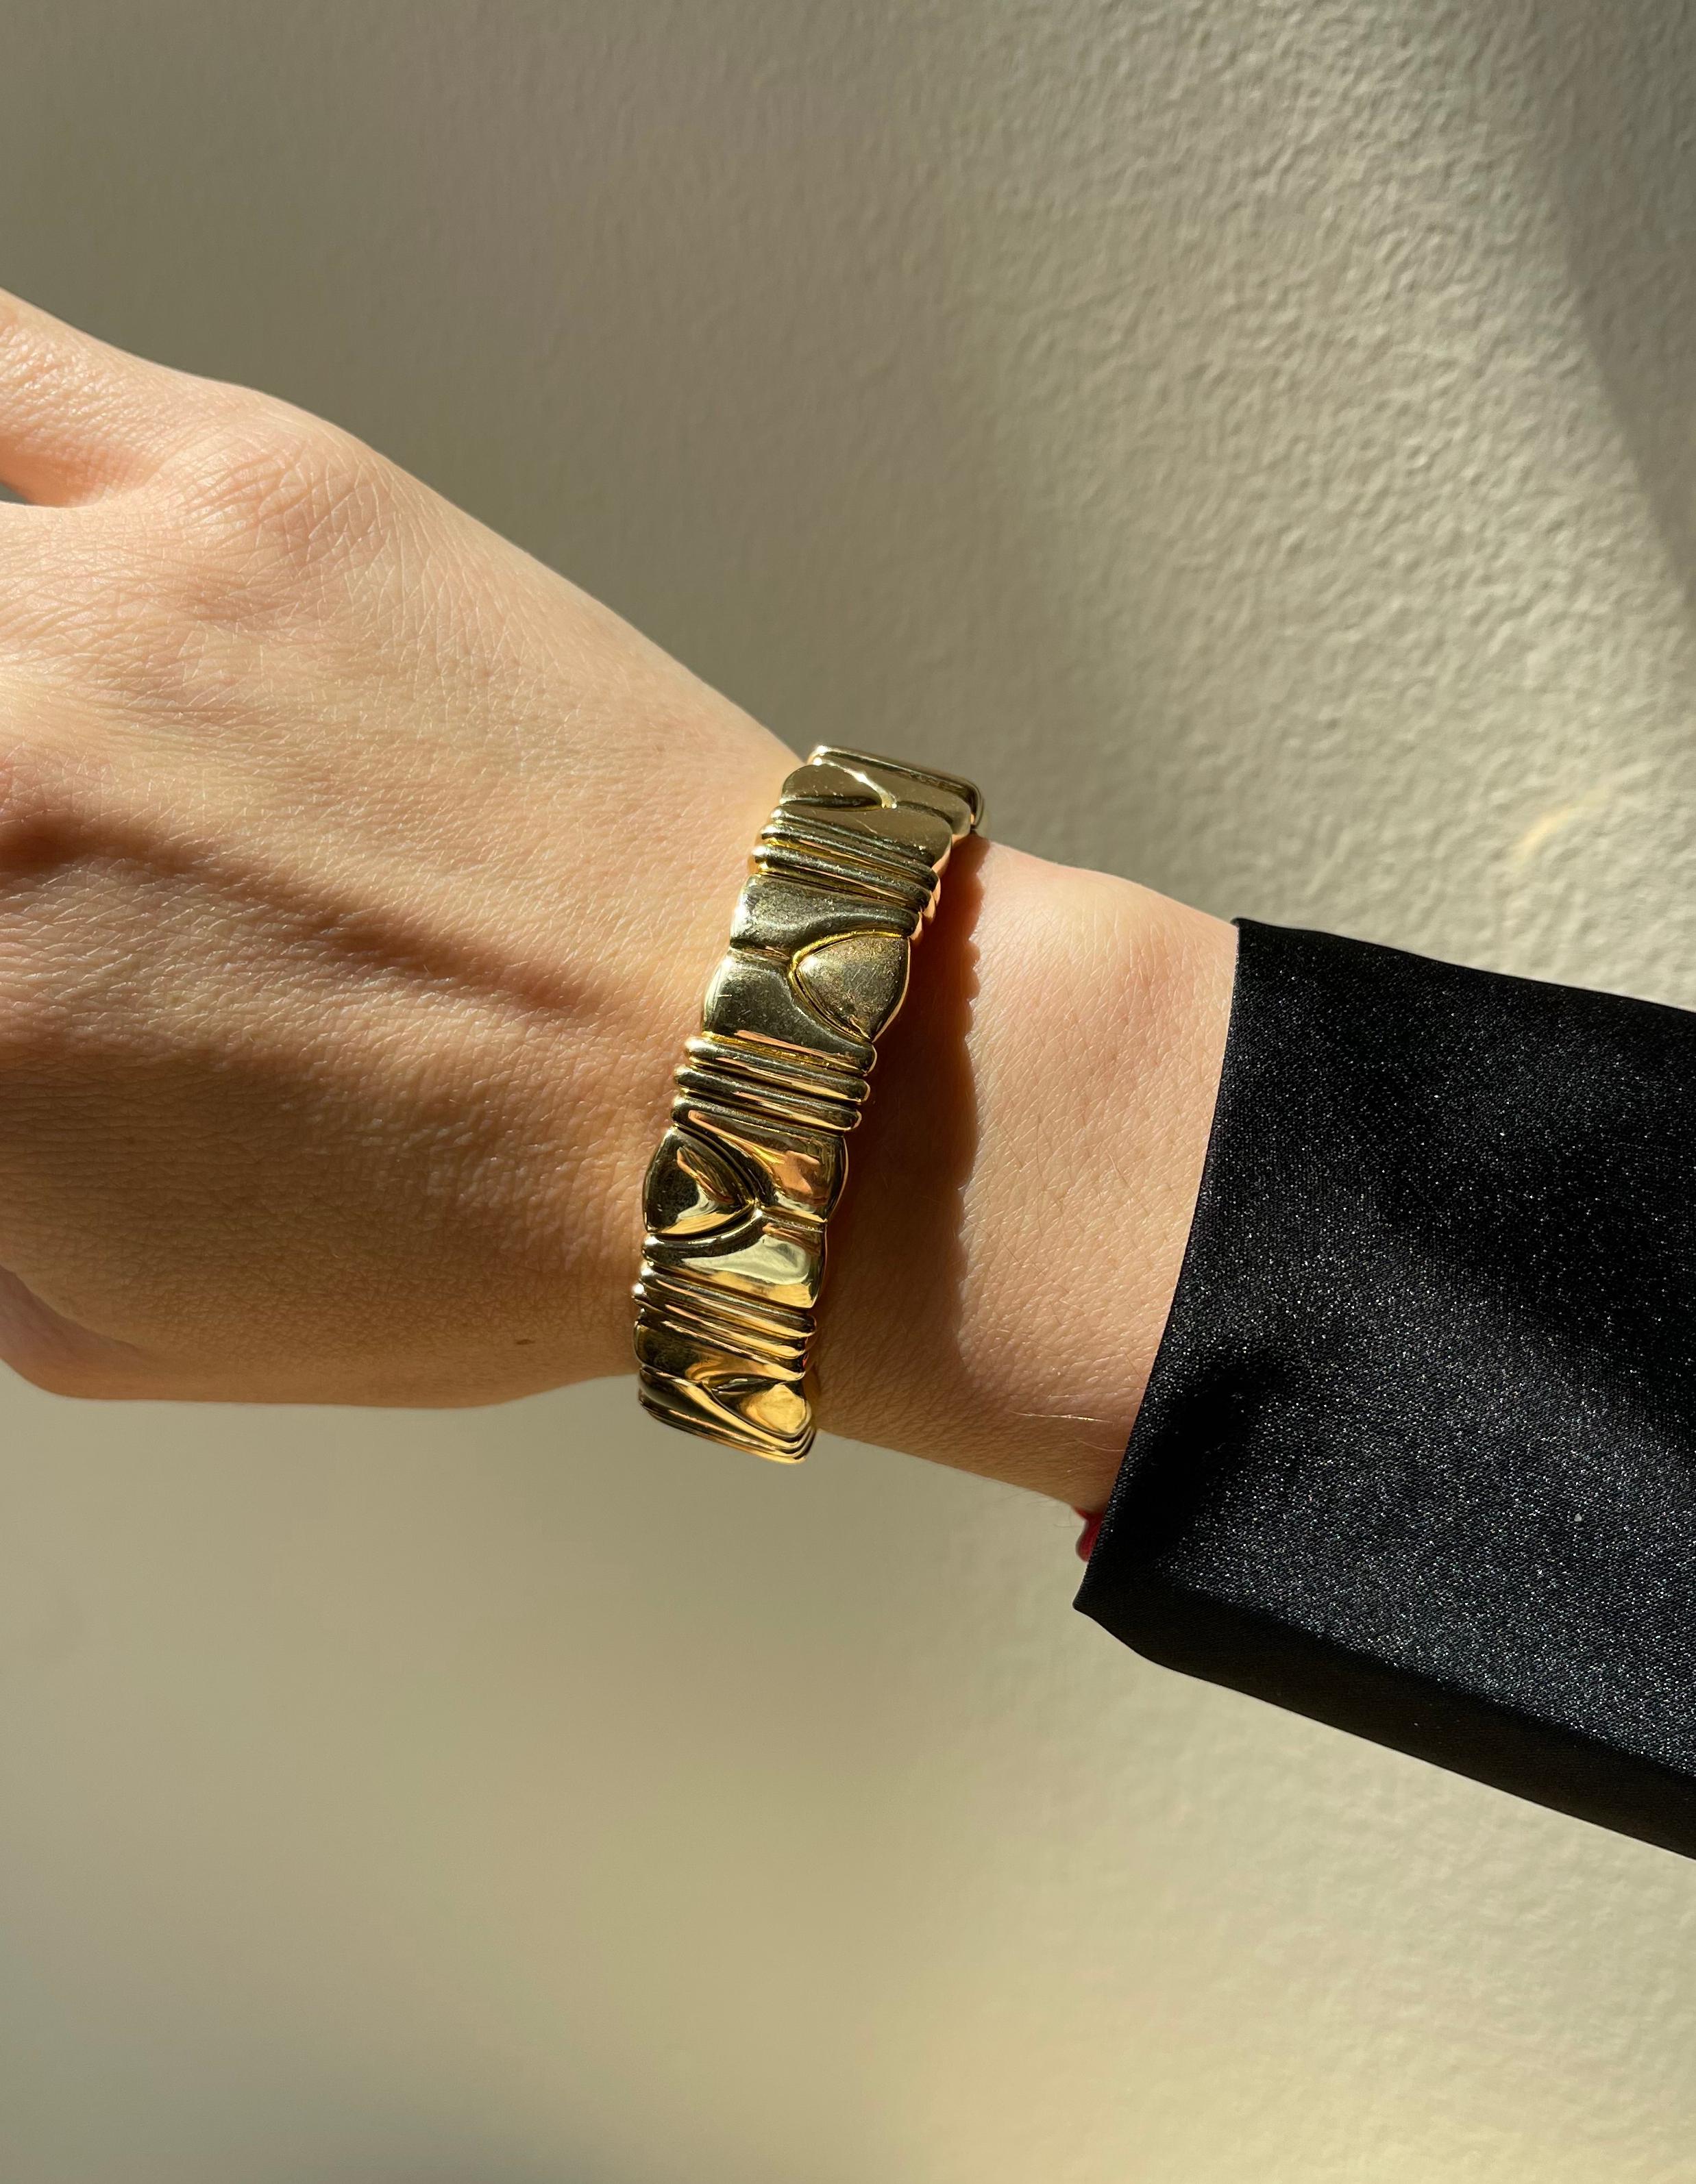 Classic Doppio Cuore 18k gold bracelet by Bvlgari, featuring timeless design. Bracelet will fit an average 7